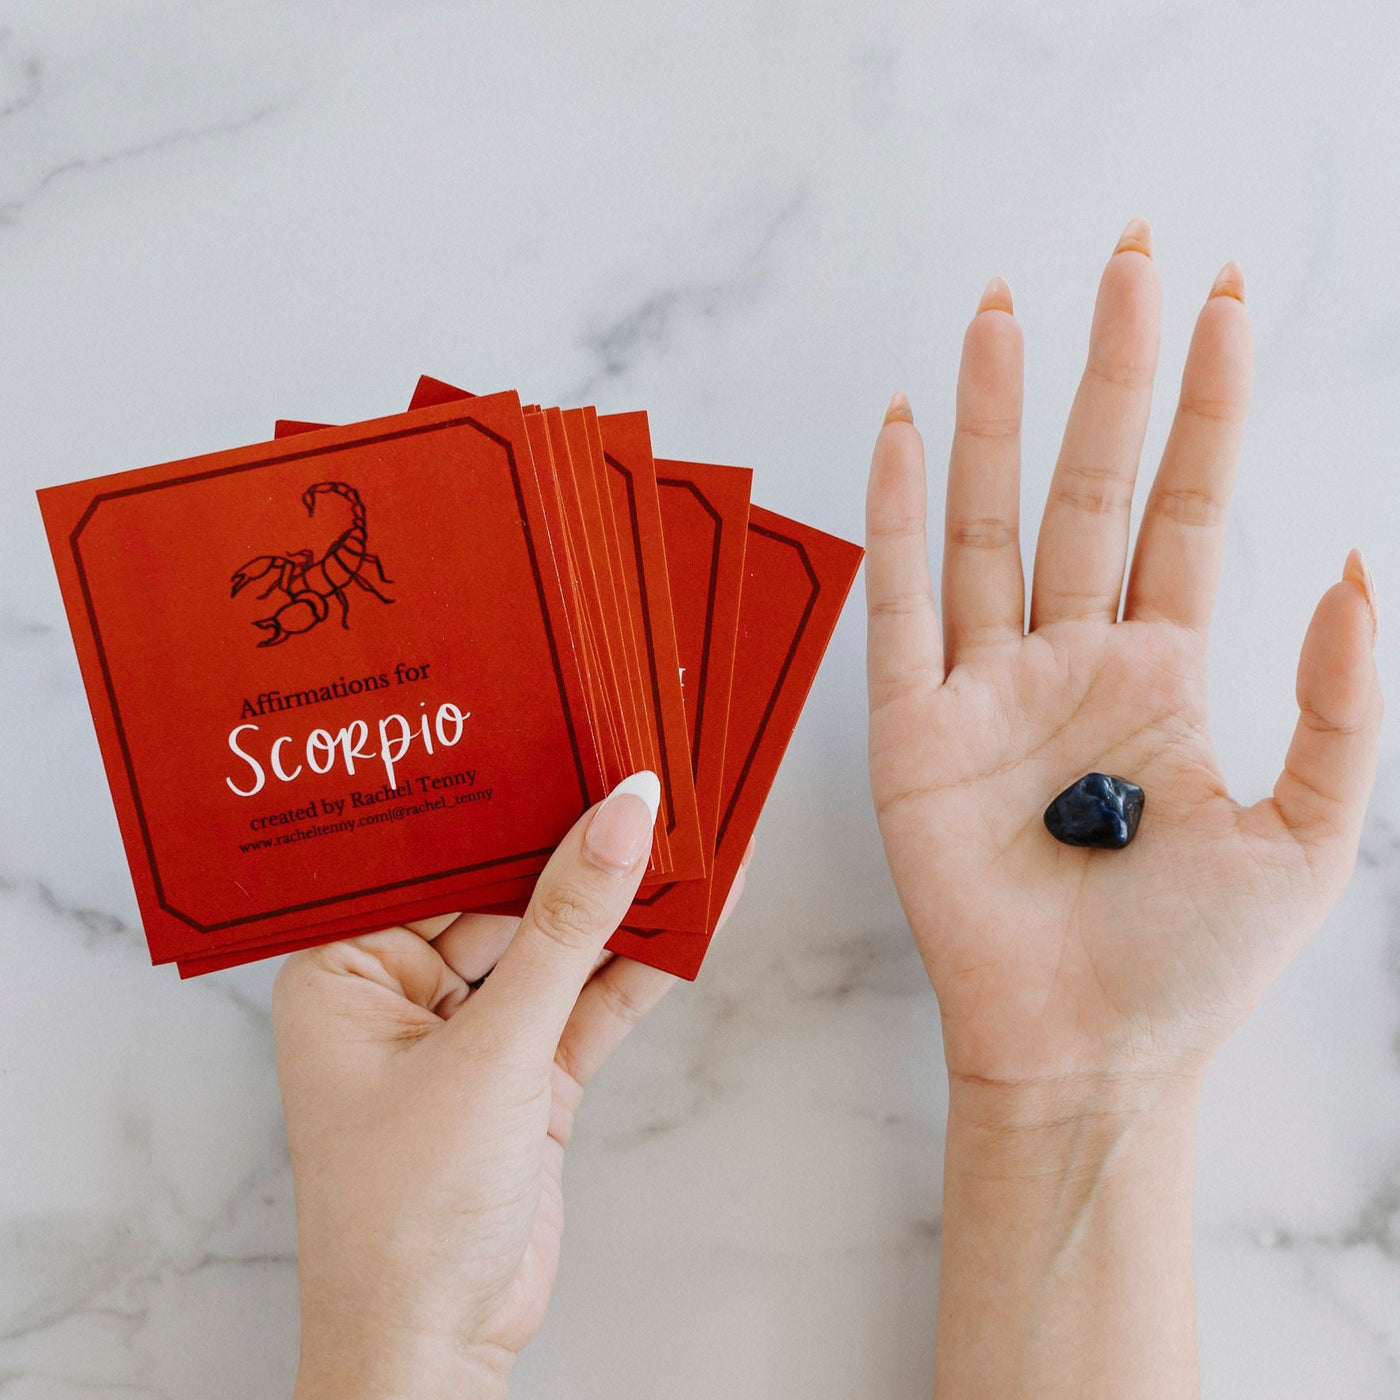 Affirmations for Scorpio & Crystal Set